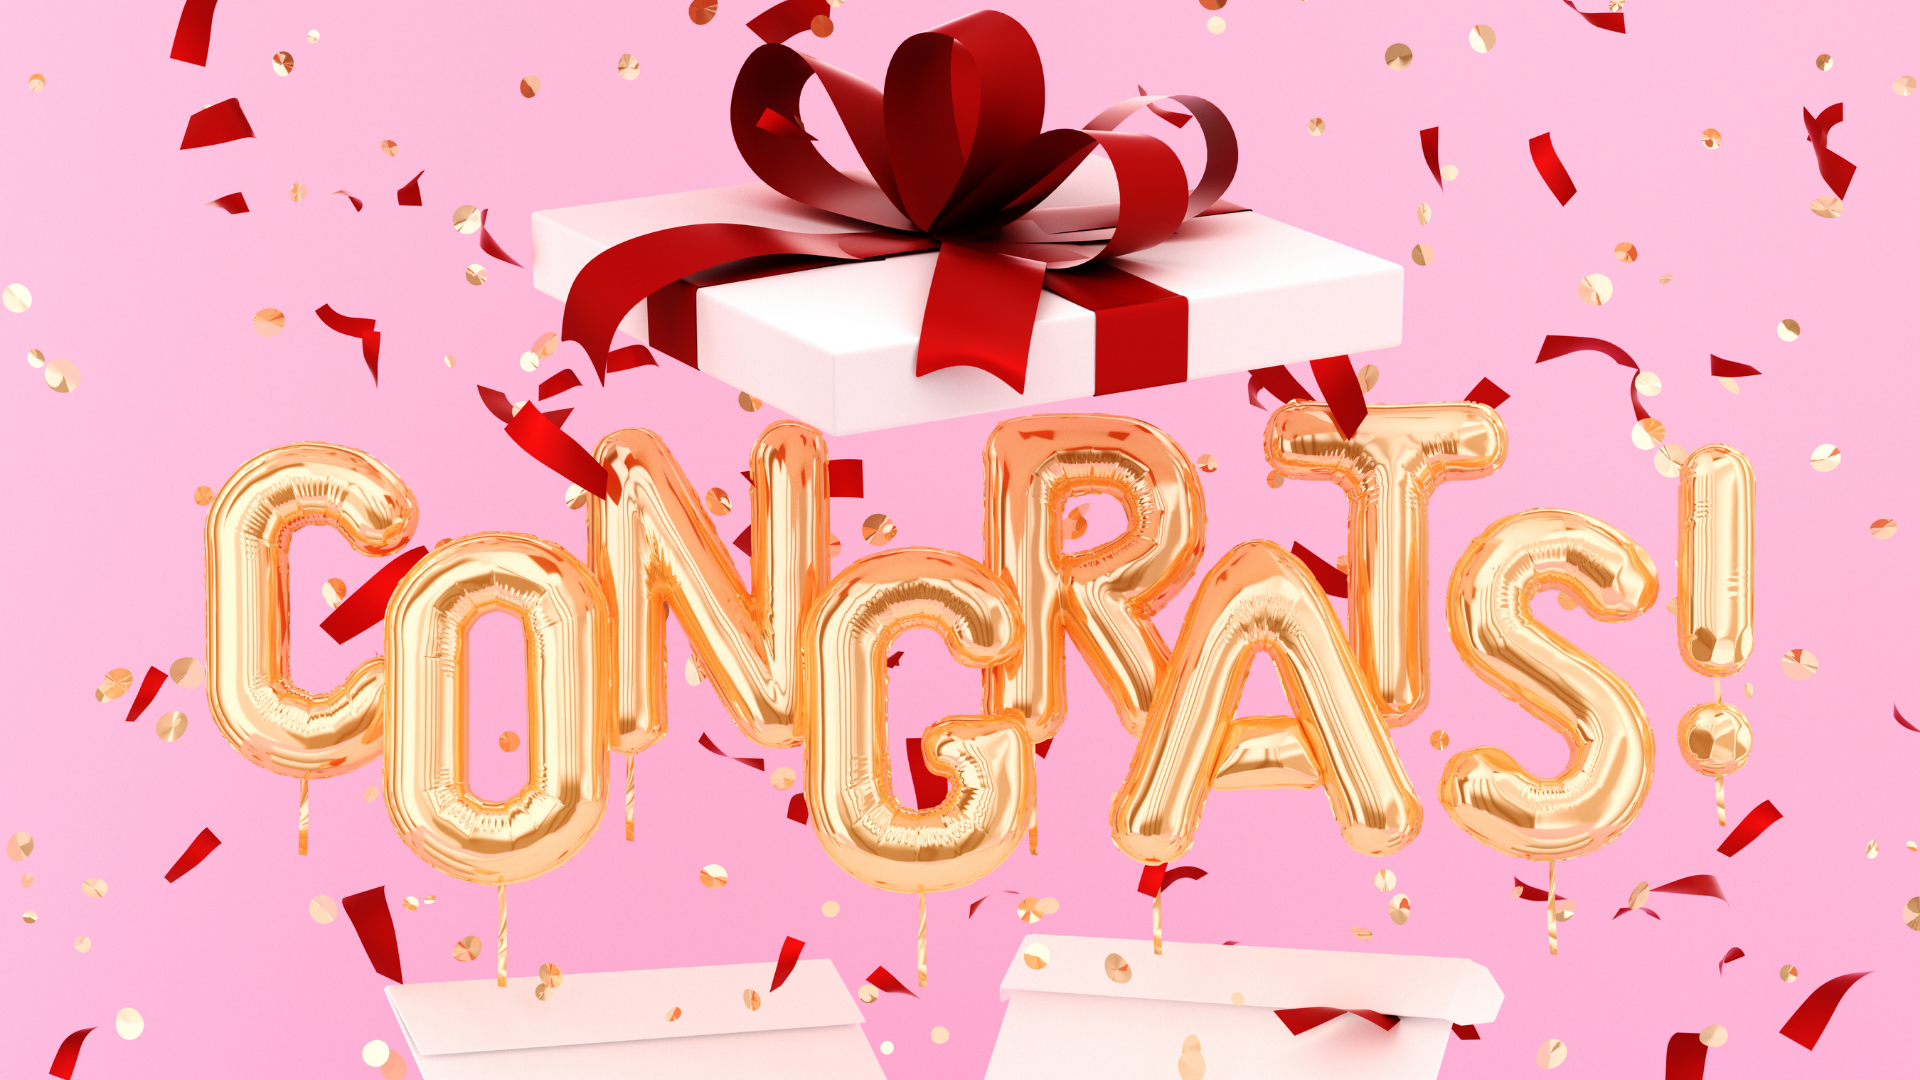 Gold balloons spelling 'congrats' bursting out of a gift box on a pink background